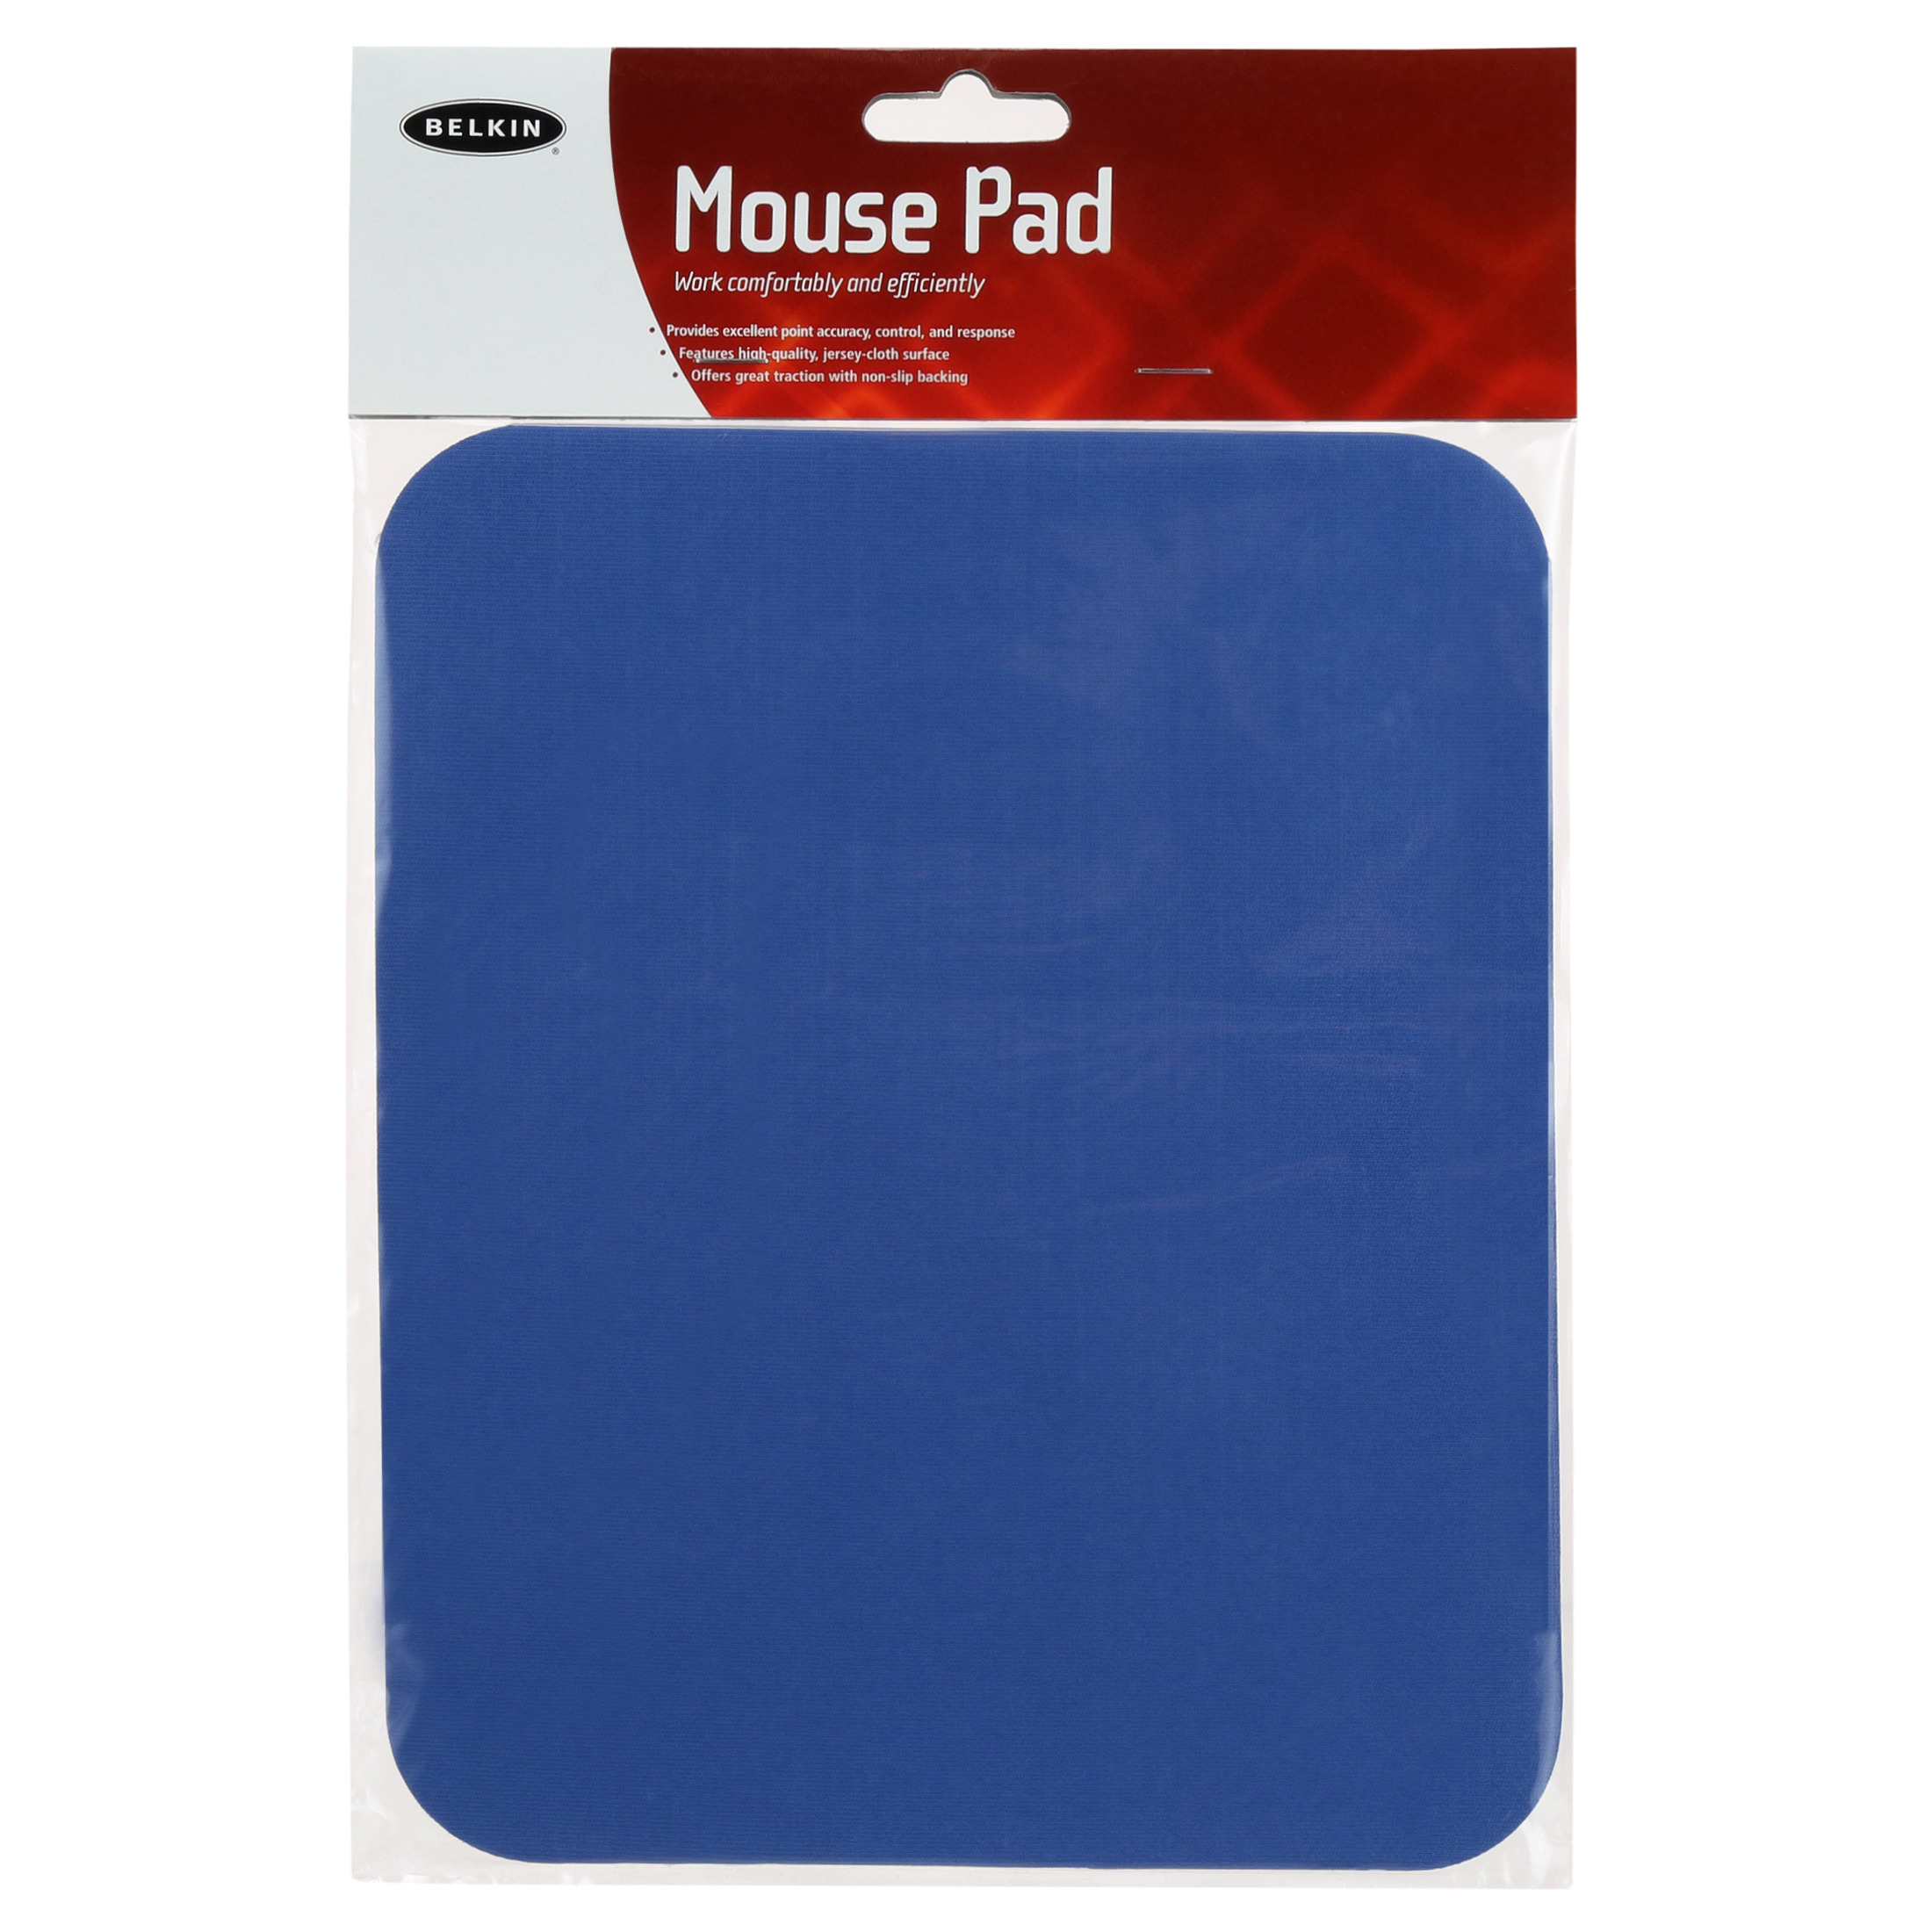 Belkin Non-Slip Neoprene Mouse Pad, Compatible with Wired and Wireless Mouse, Blue (1-Pack) - image 2 of 2